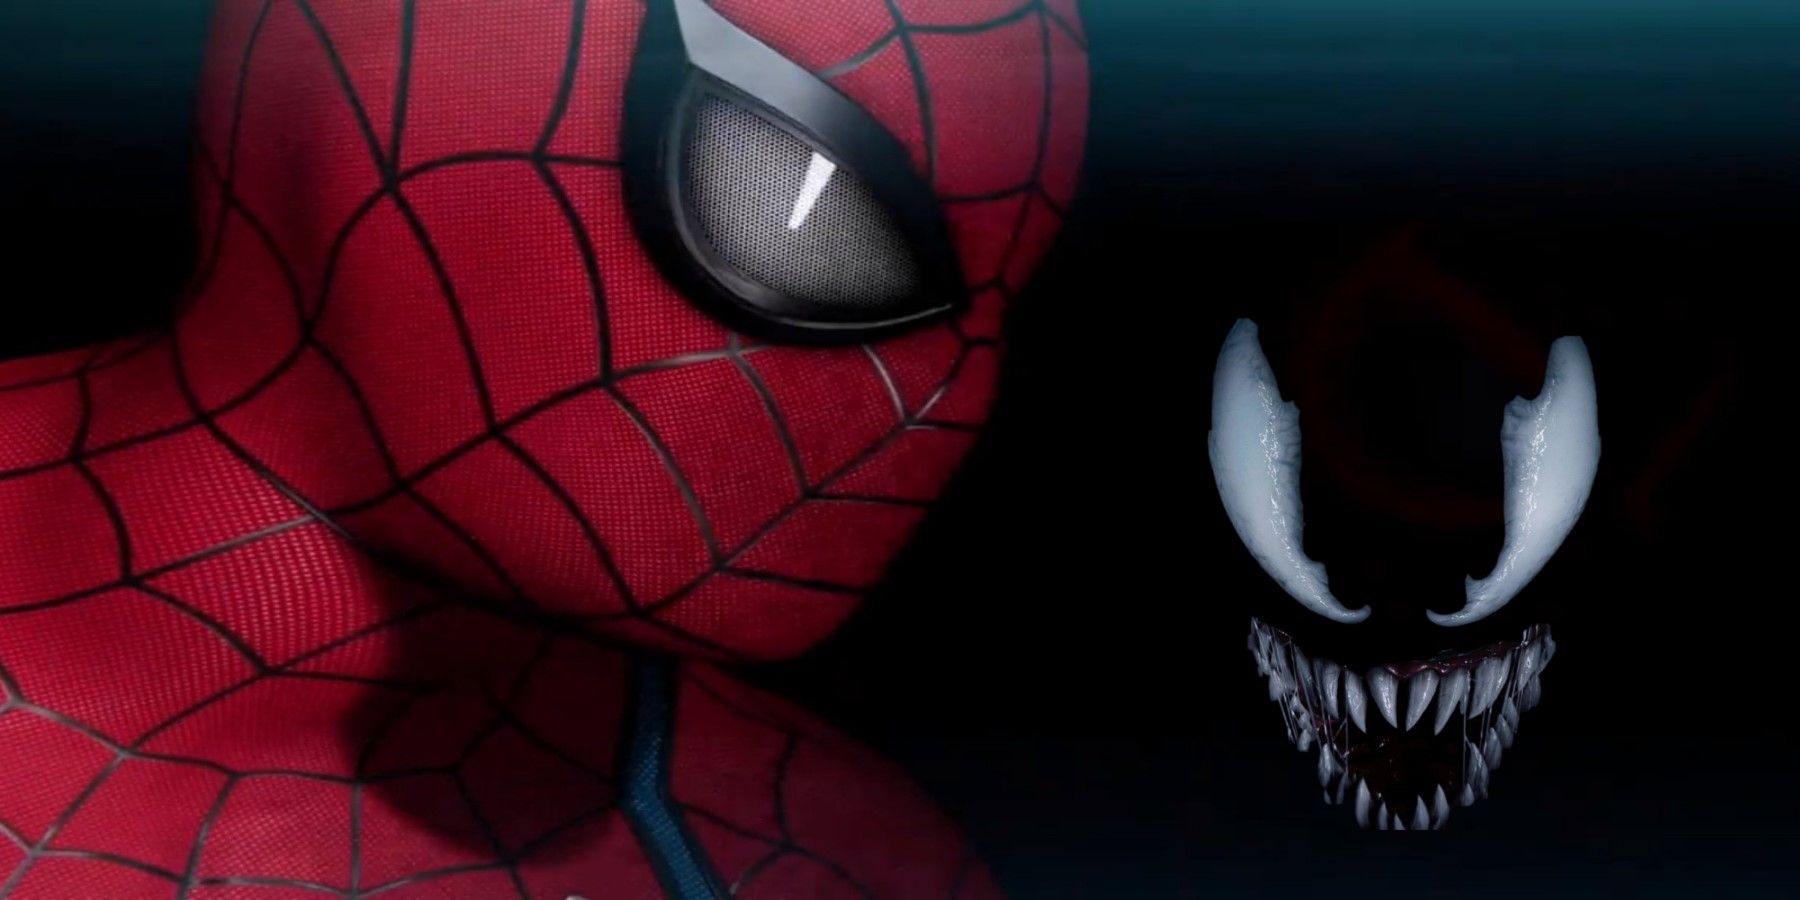 Marvel's Spider-Man 2 Venom Actor May Be Teasing New Announcement